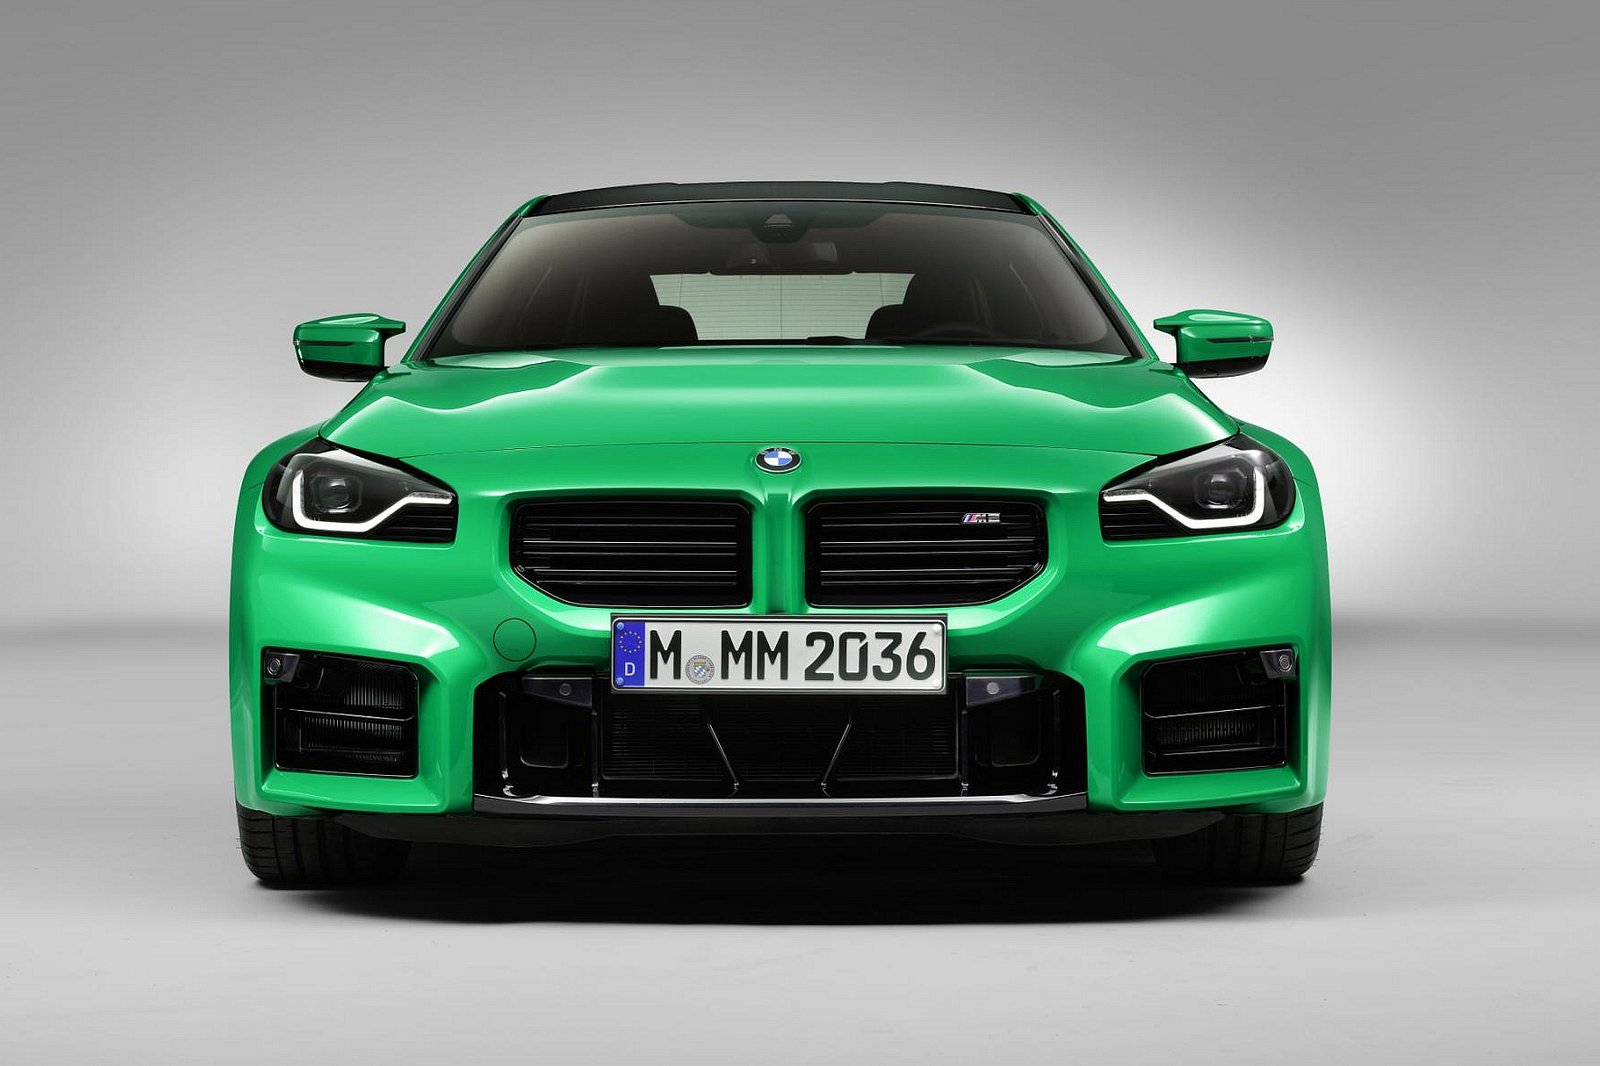 2025 BMW M2 Facelift Coming This Year With 7 Exciting New Colors